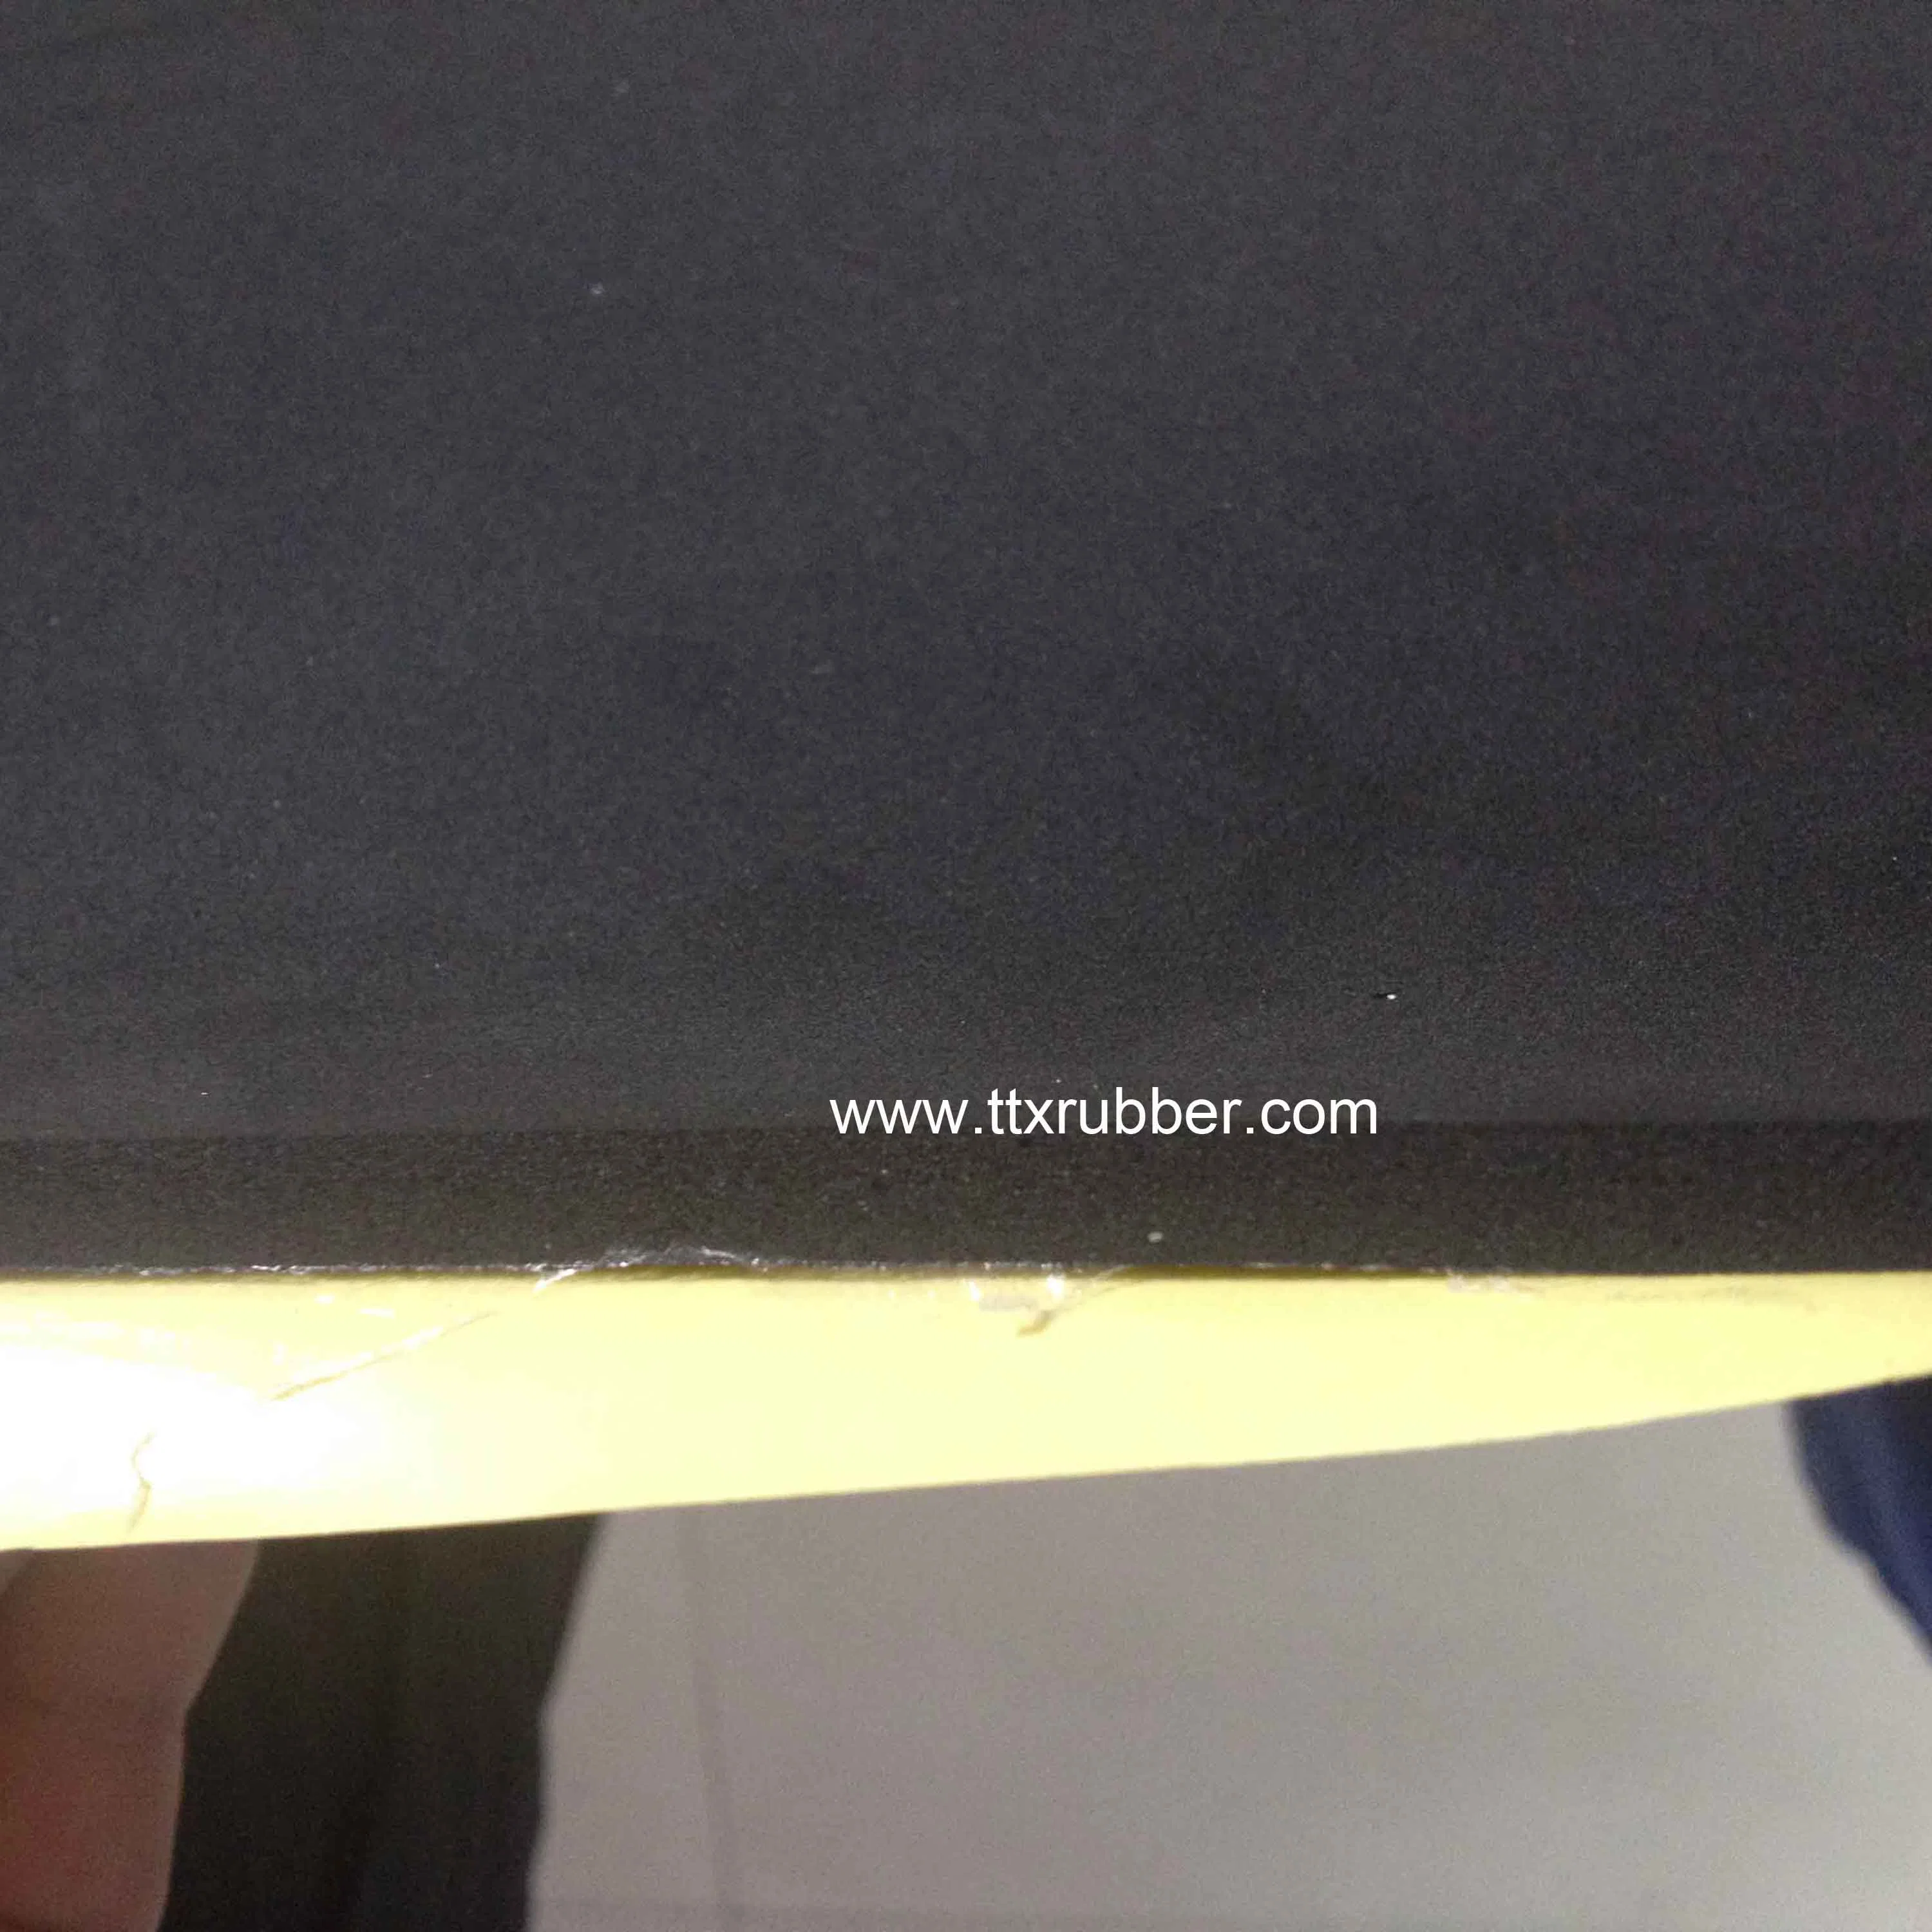 Mouse Pad Material, Mouse Pad Backing Material